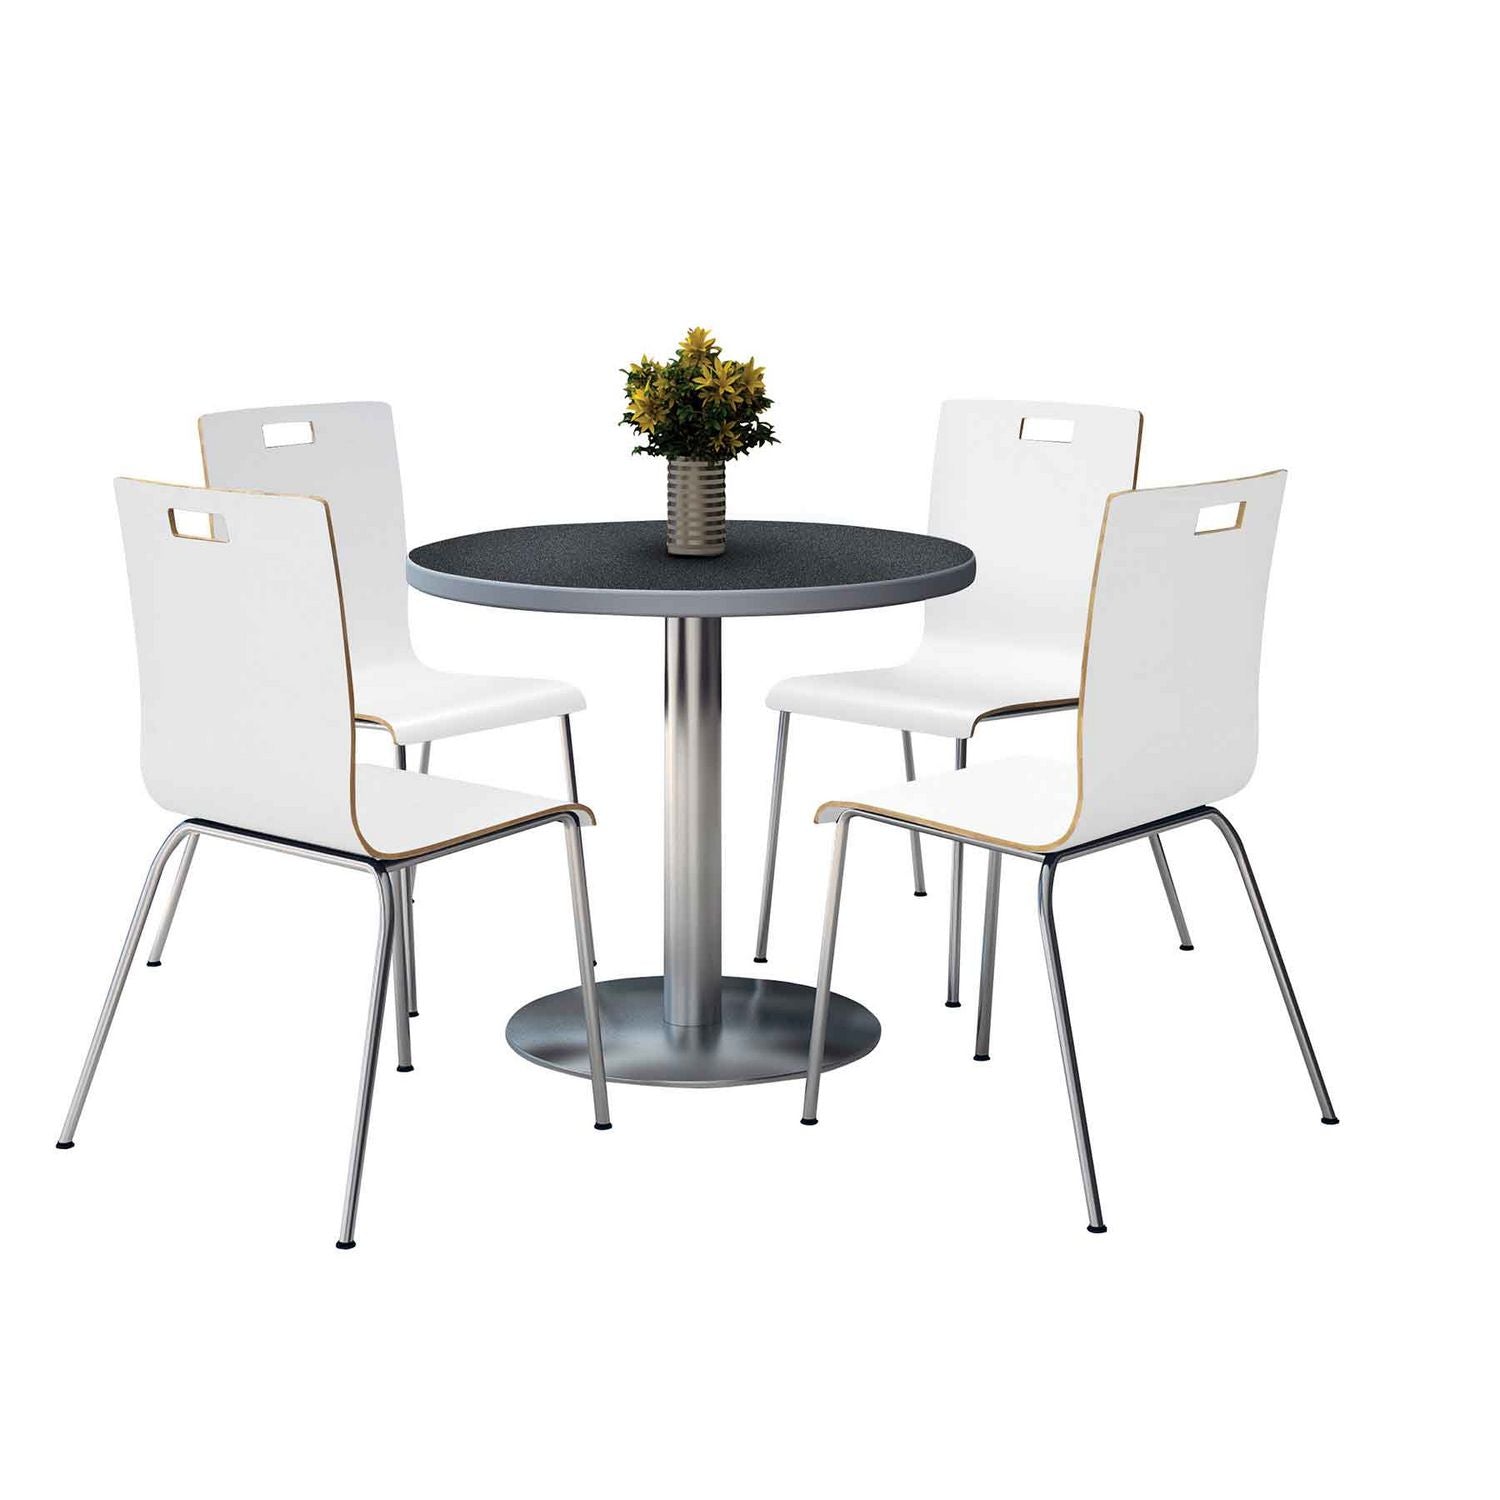 pedestal-table-with-four-white-jive-series-chairs-round-36-dia-x-29h-graphite-nebula-ships-in-4-6-business-days_kfi810389025026 - 1